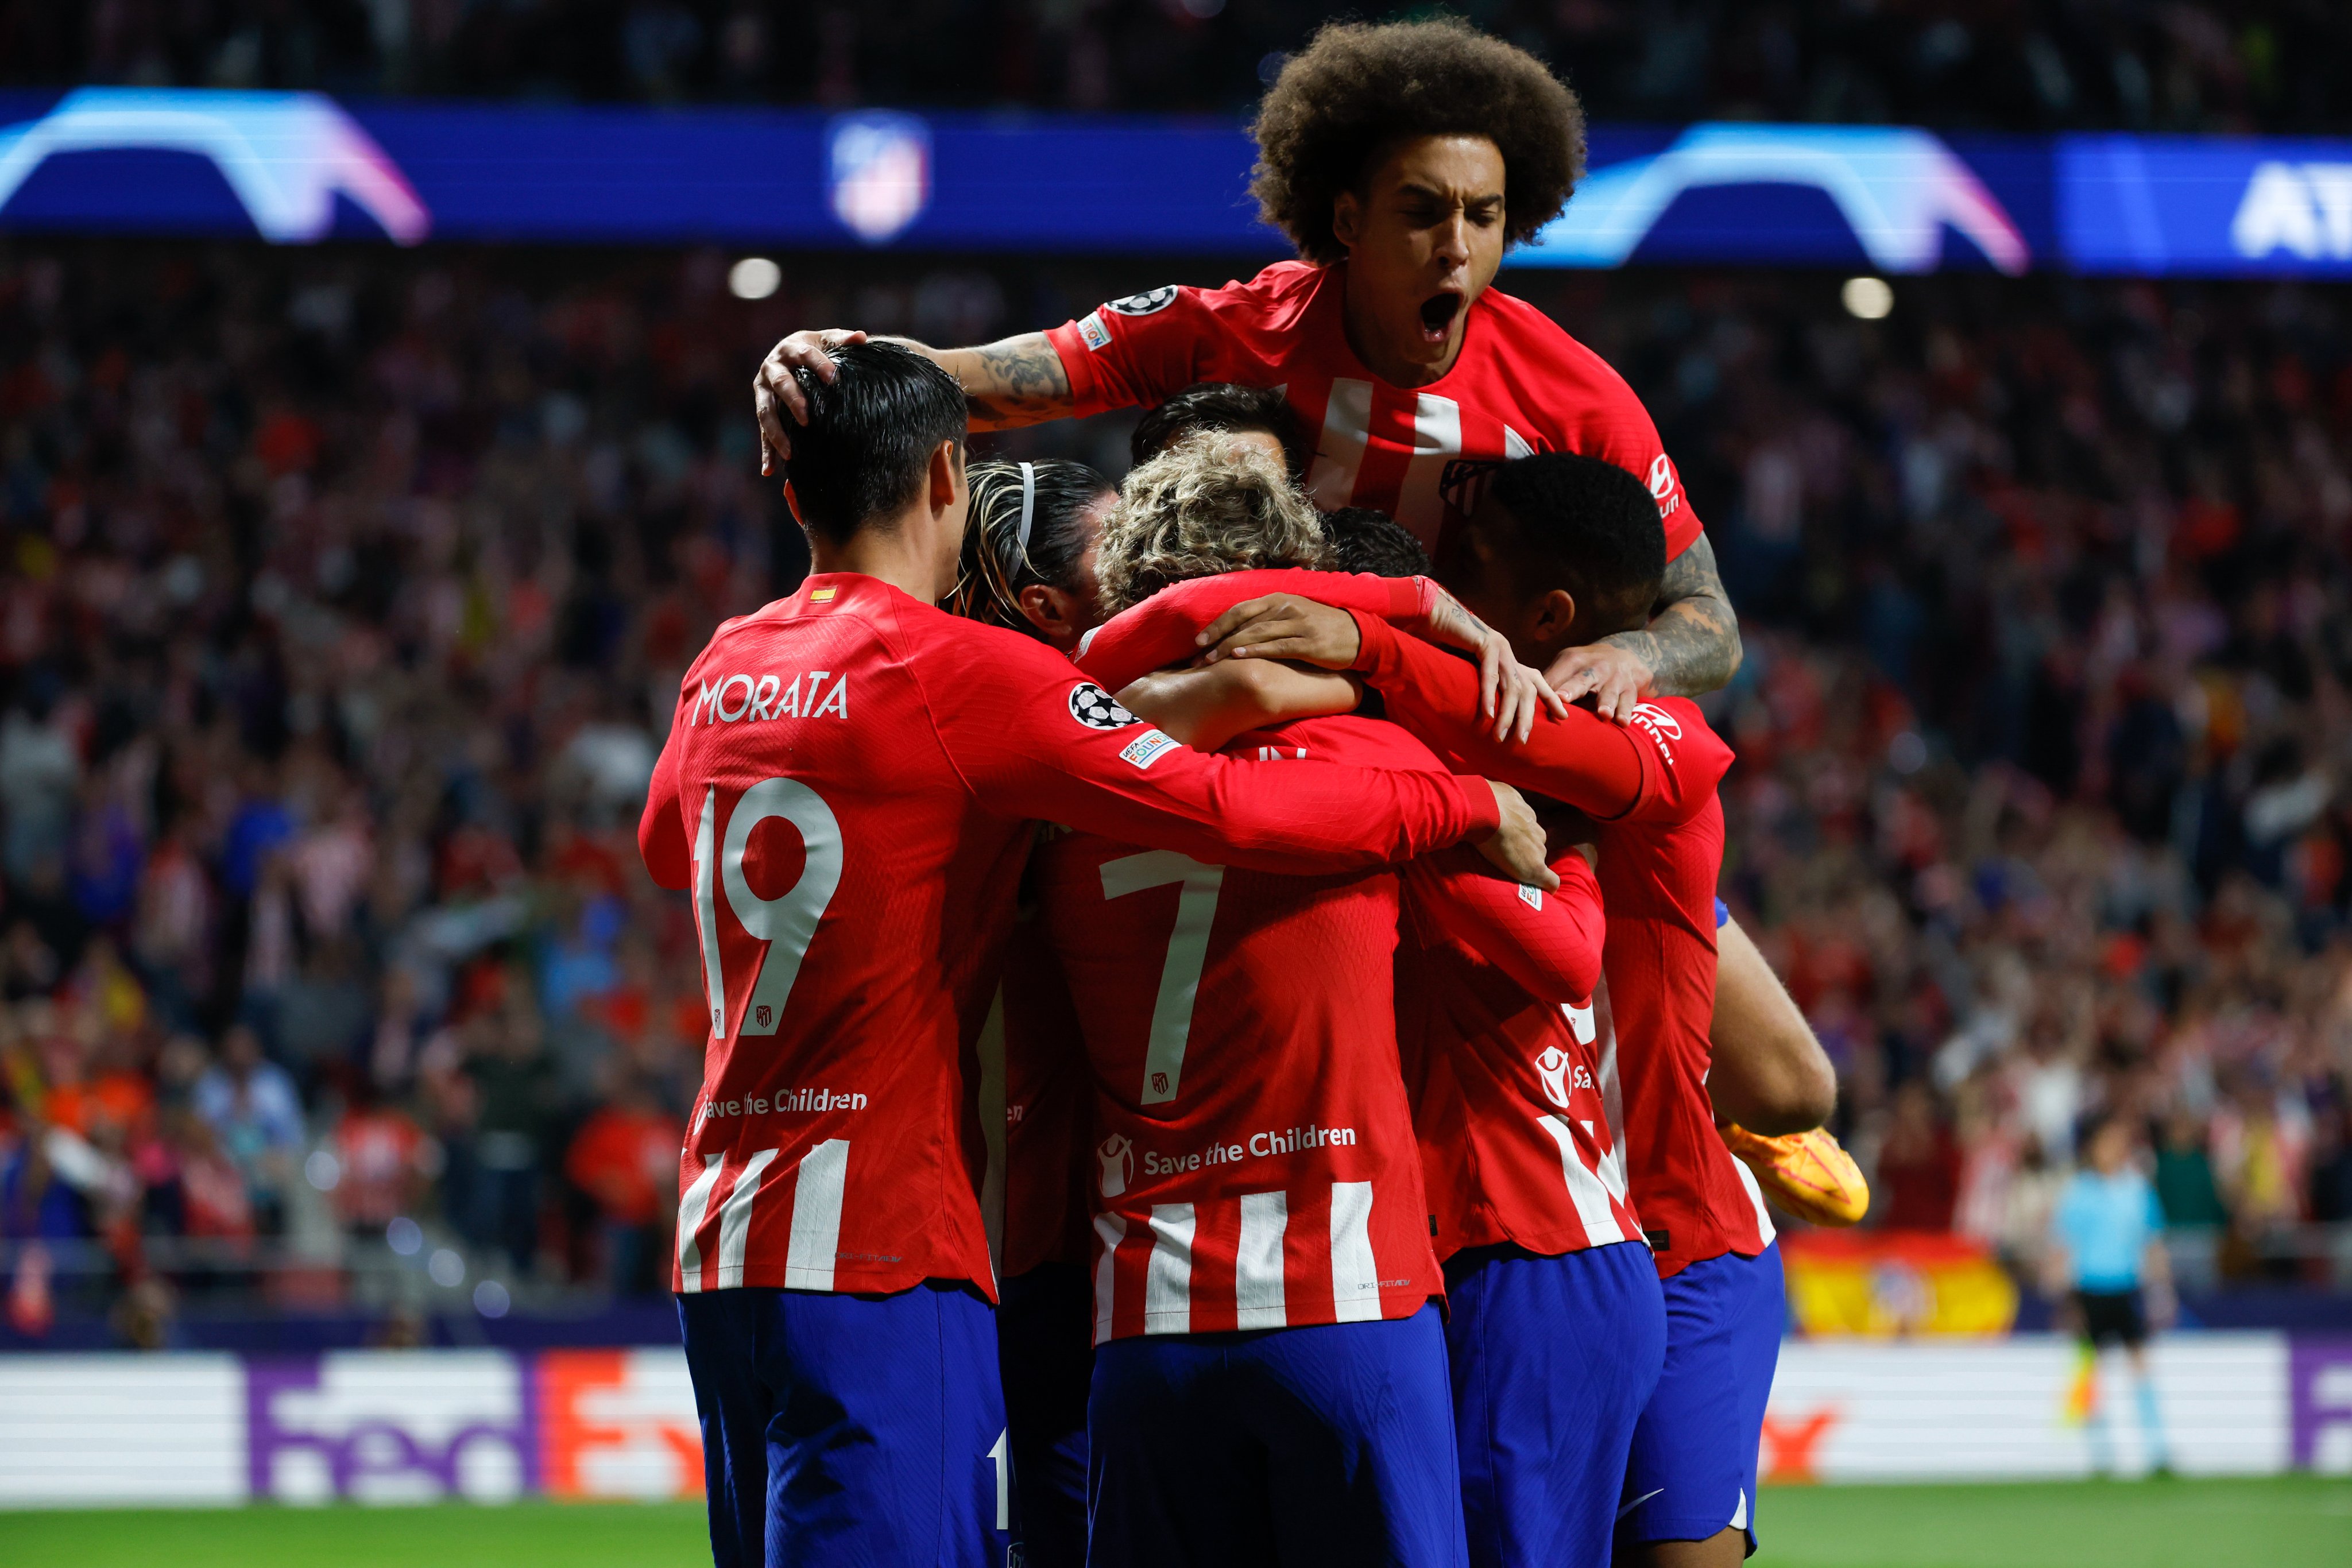 Atletico Madrid secure first leg victory over Borussia Dortmund – all to play for next week